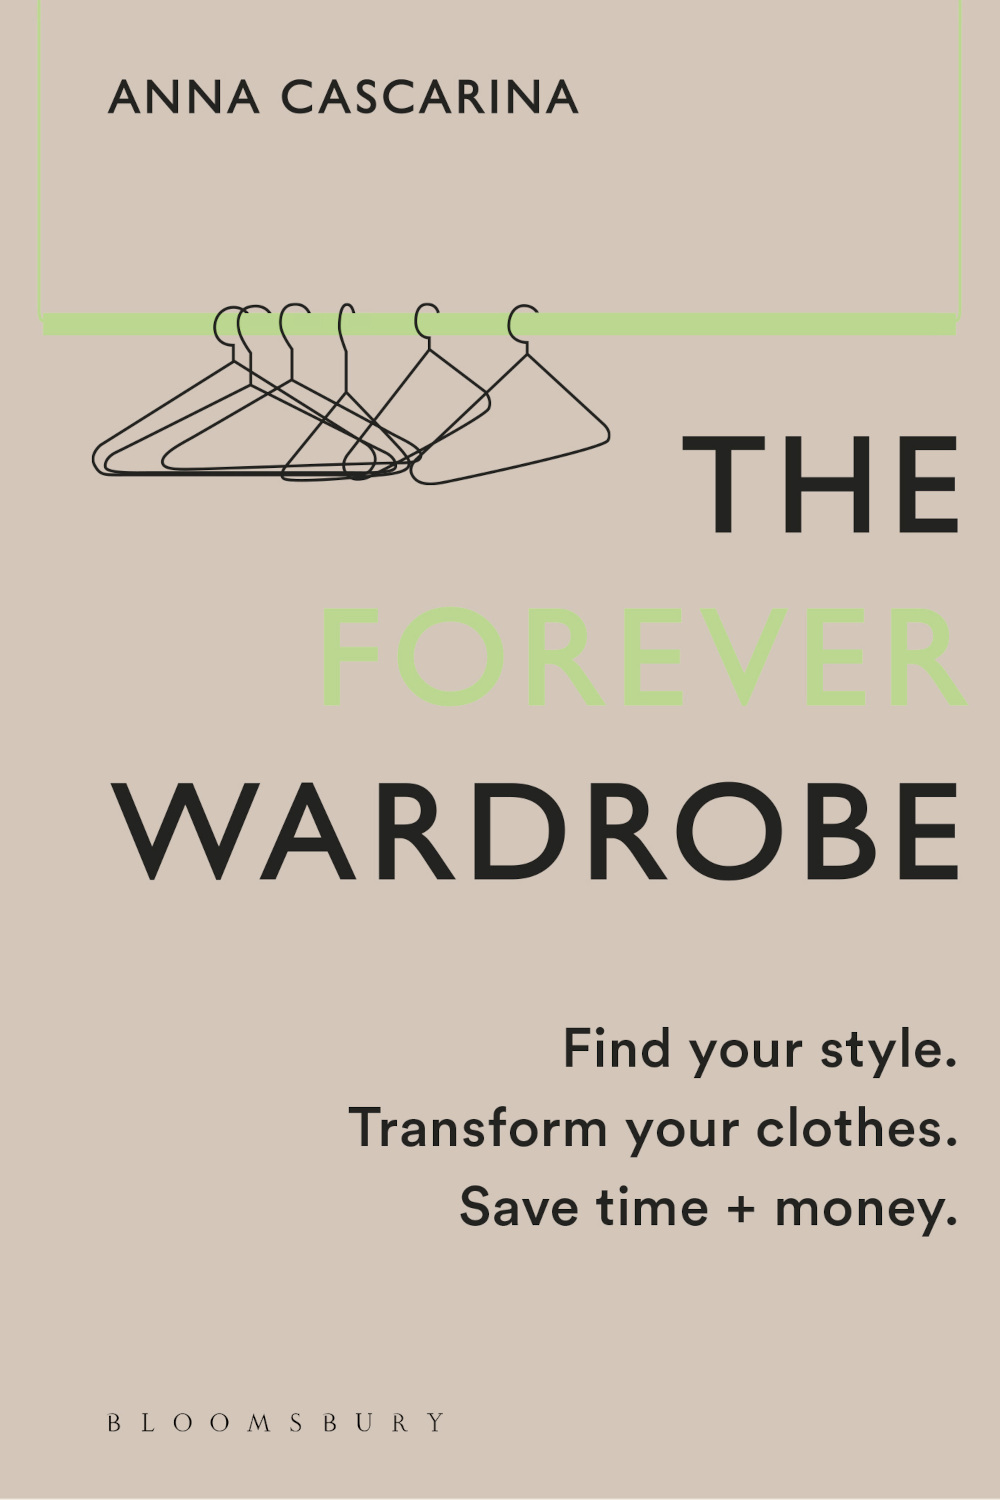 Anna Cascarina On Her New Book, The Forever Wardrobe